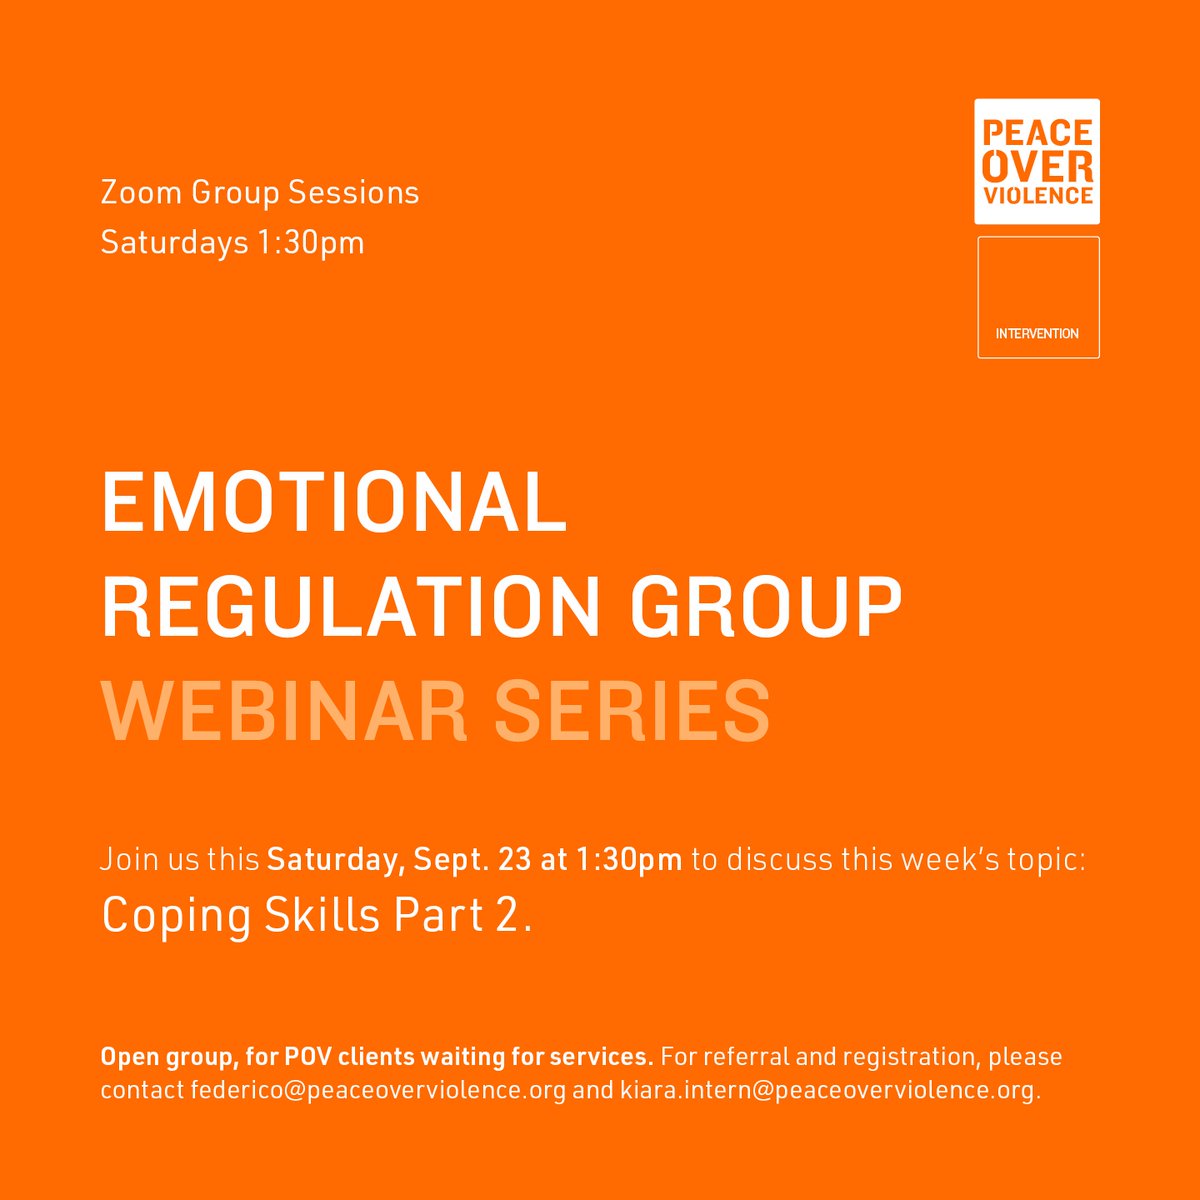 Time for another virtual Emotional Regulation Group session! Open to existing POV clients, this session will explore Coping Skills to improve #wellbeing, #communication, #MentalHealth + more. To register, email Federico@PeaceOverViolence.org or Kiara.Intern@PeaceOverViolence.org